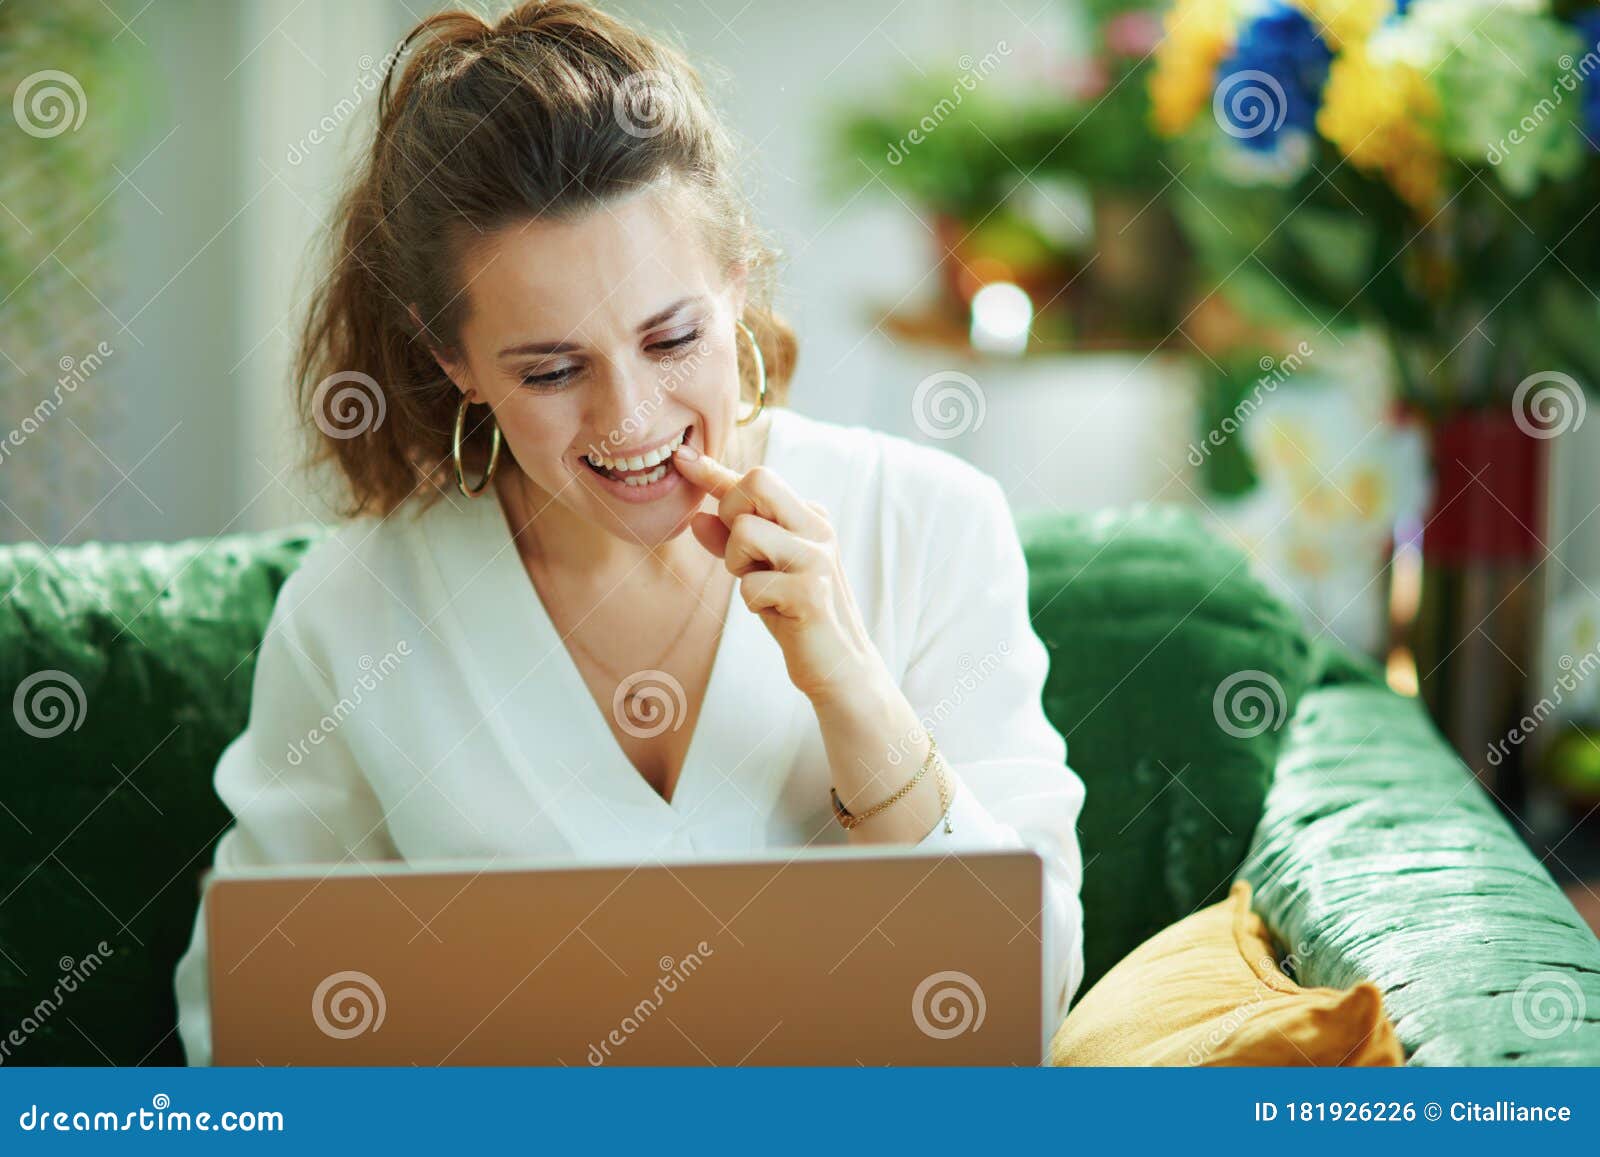 woman speaking with dentist in modern living room in sunny day